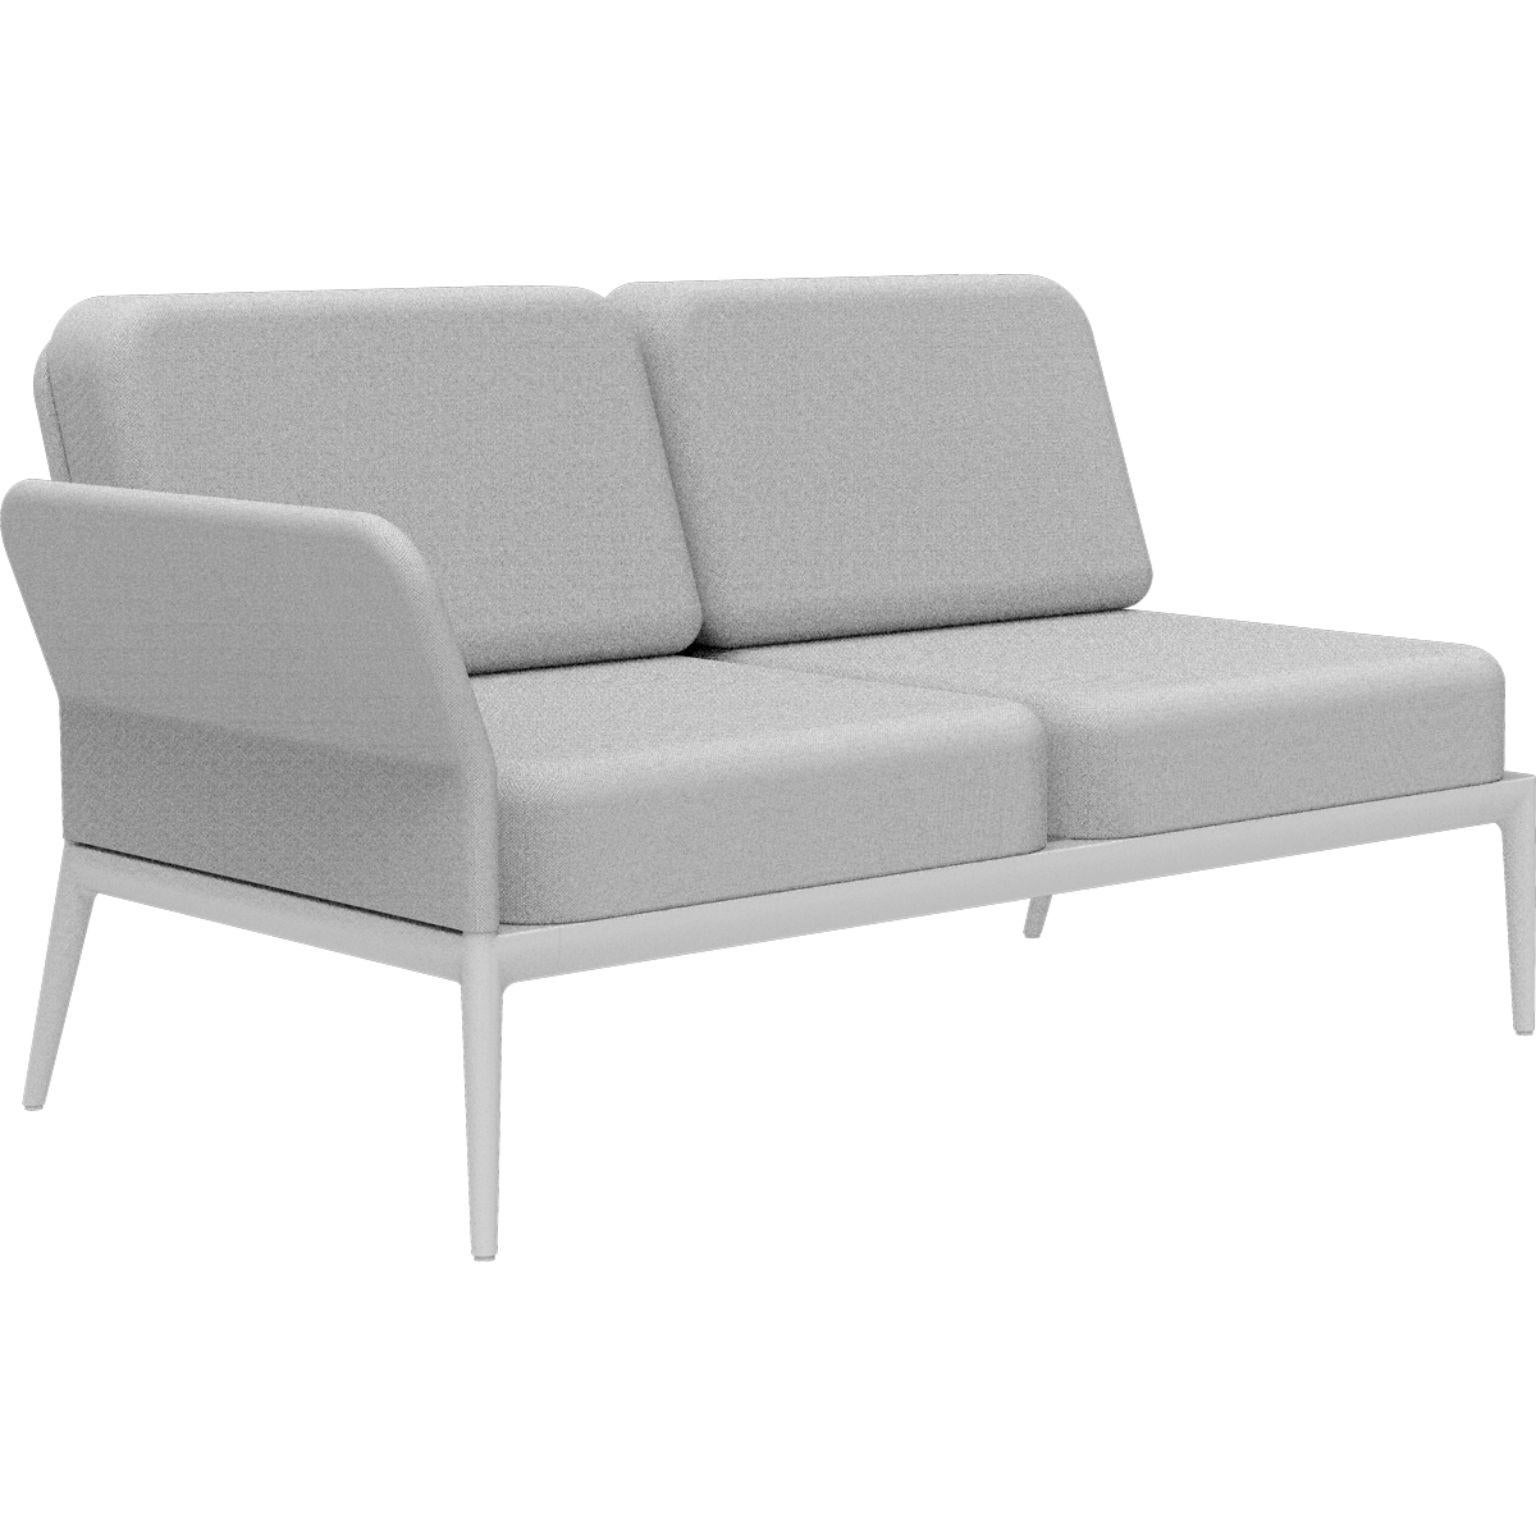 Cover White Double Right Modular Sofa by MOWEE
Dimensions: D83 x W148 x H81 cm (seat height 42 cm).
Material: Aluminum and upholstery.
Weight: 29 kg.
Also available in different colors and finishes. 

An unmistakable collection for its beauty